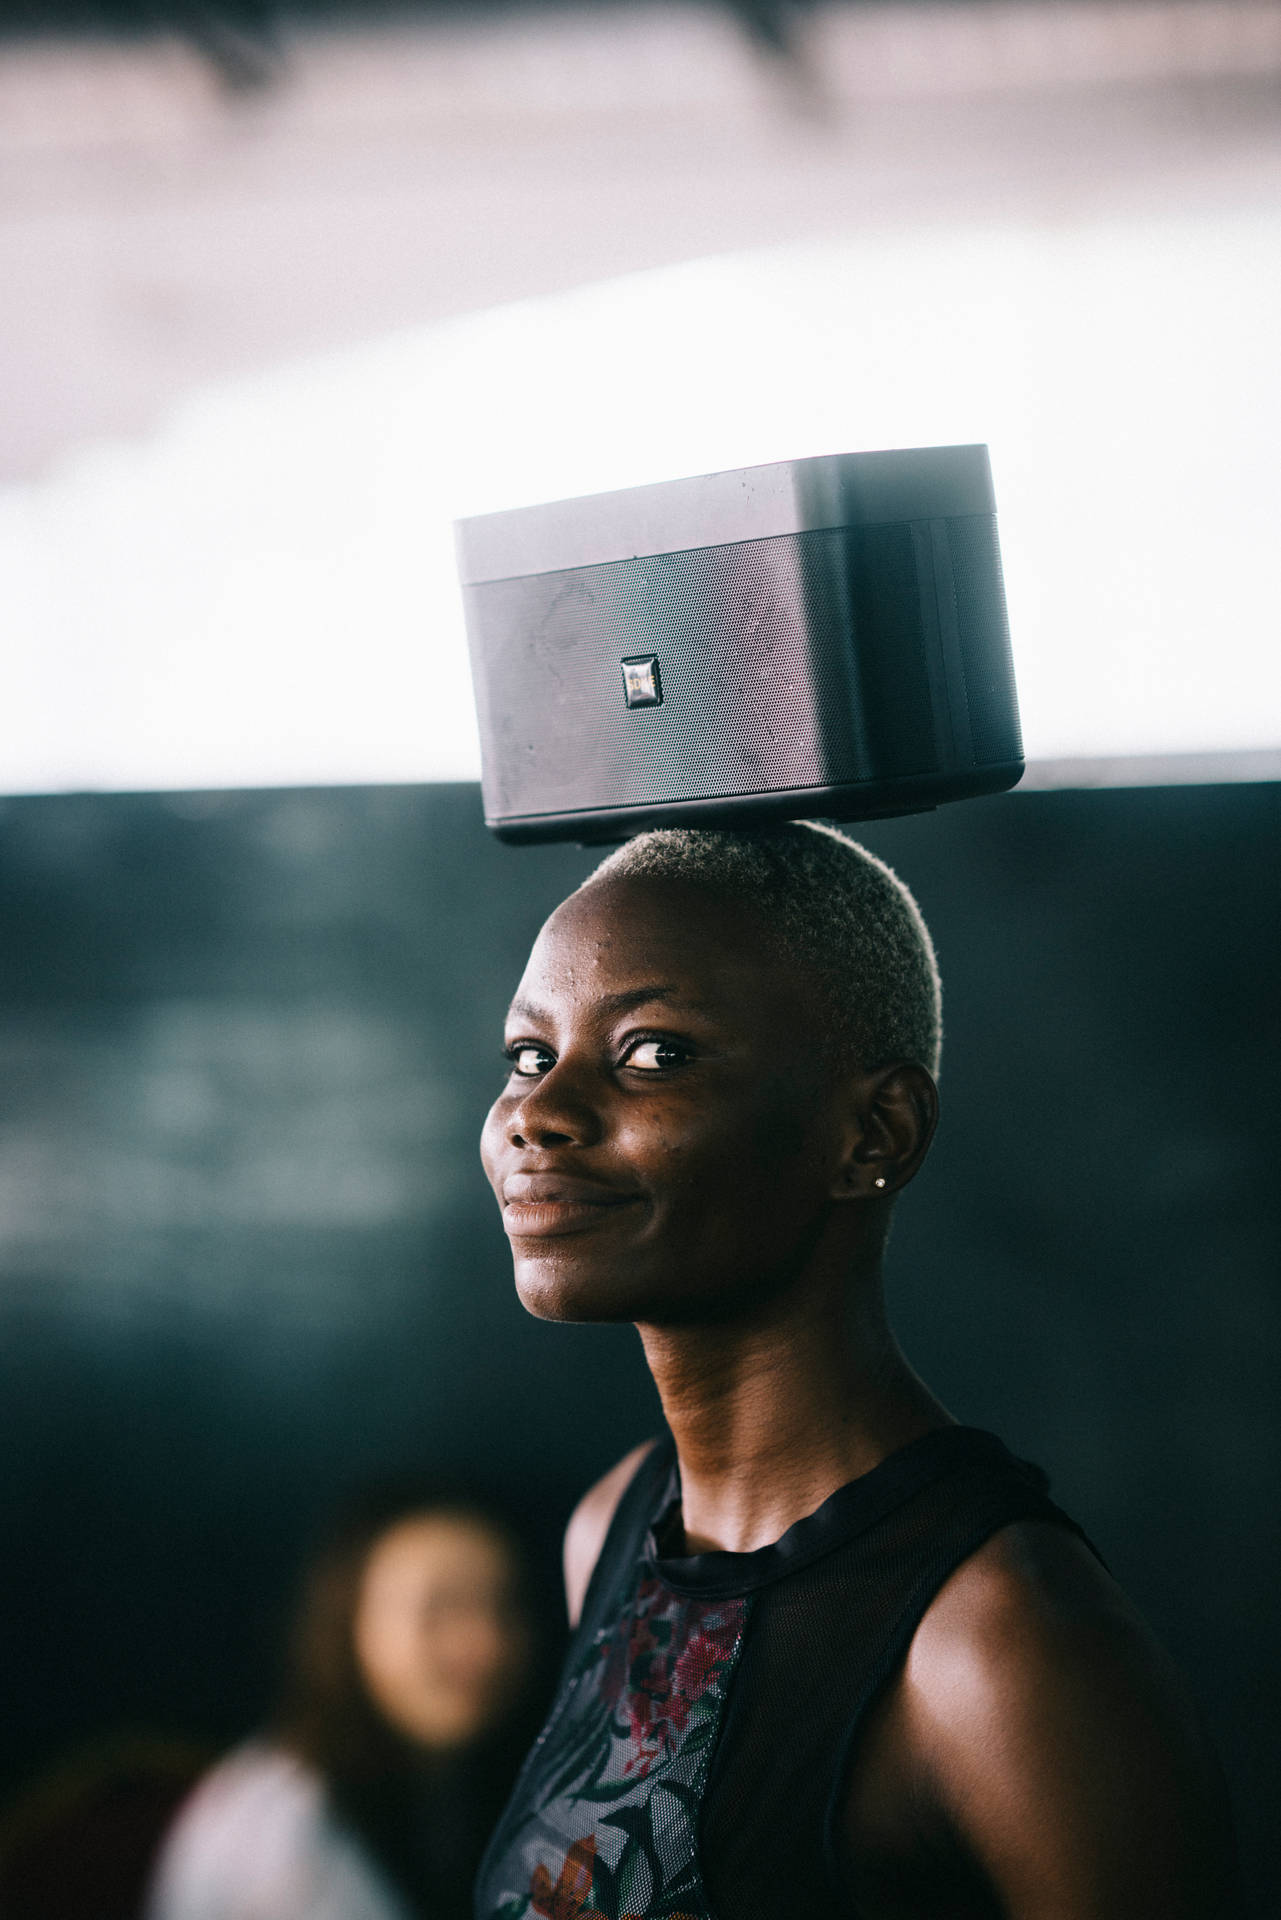 Woman With Stereo On Head In Sierra Leone Background